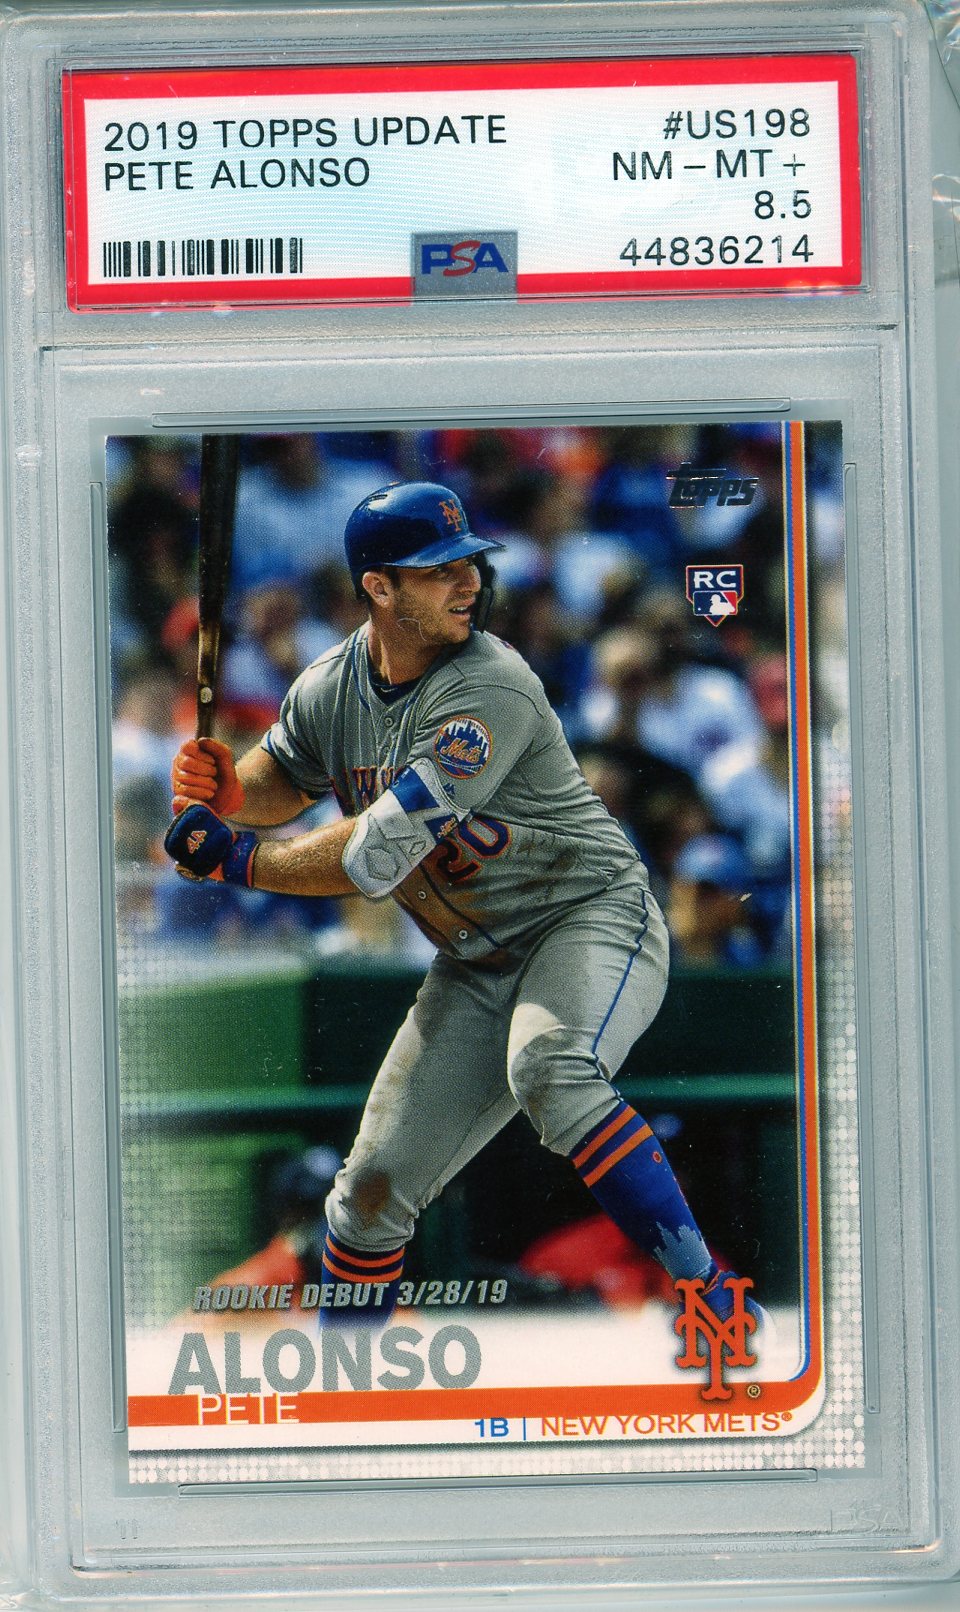 2019 Topps Update #US198 Pete Alonso Rookie Card PSA 8.5